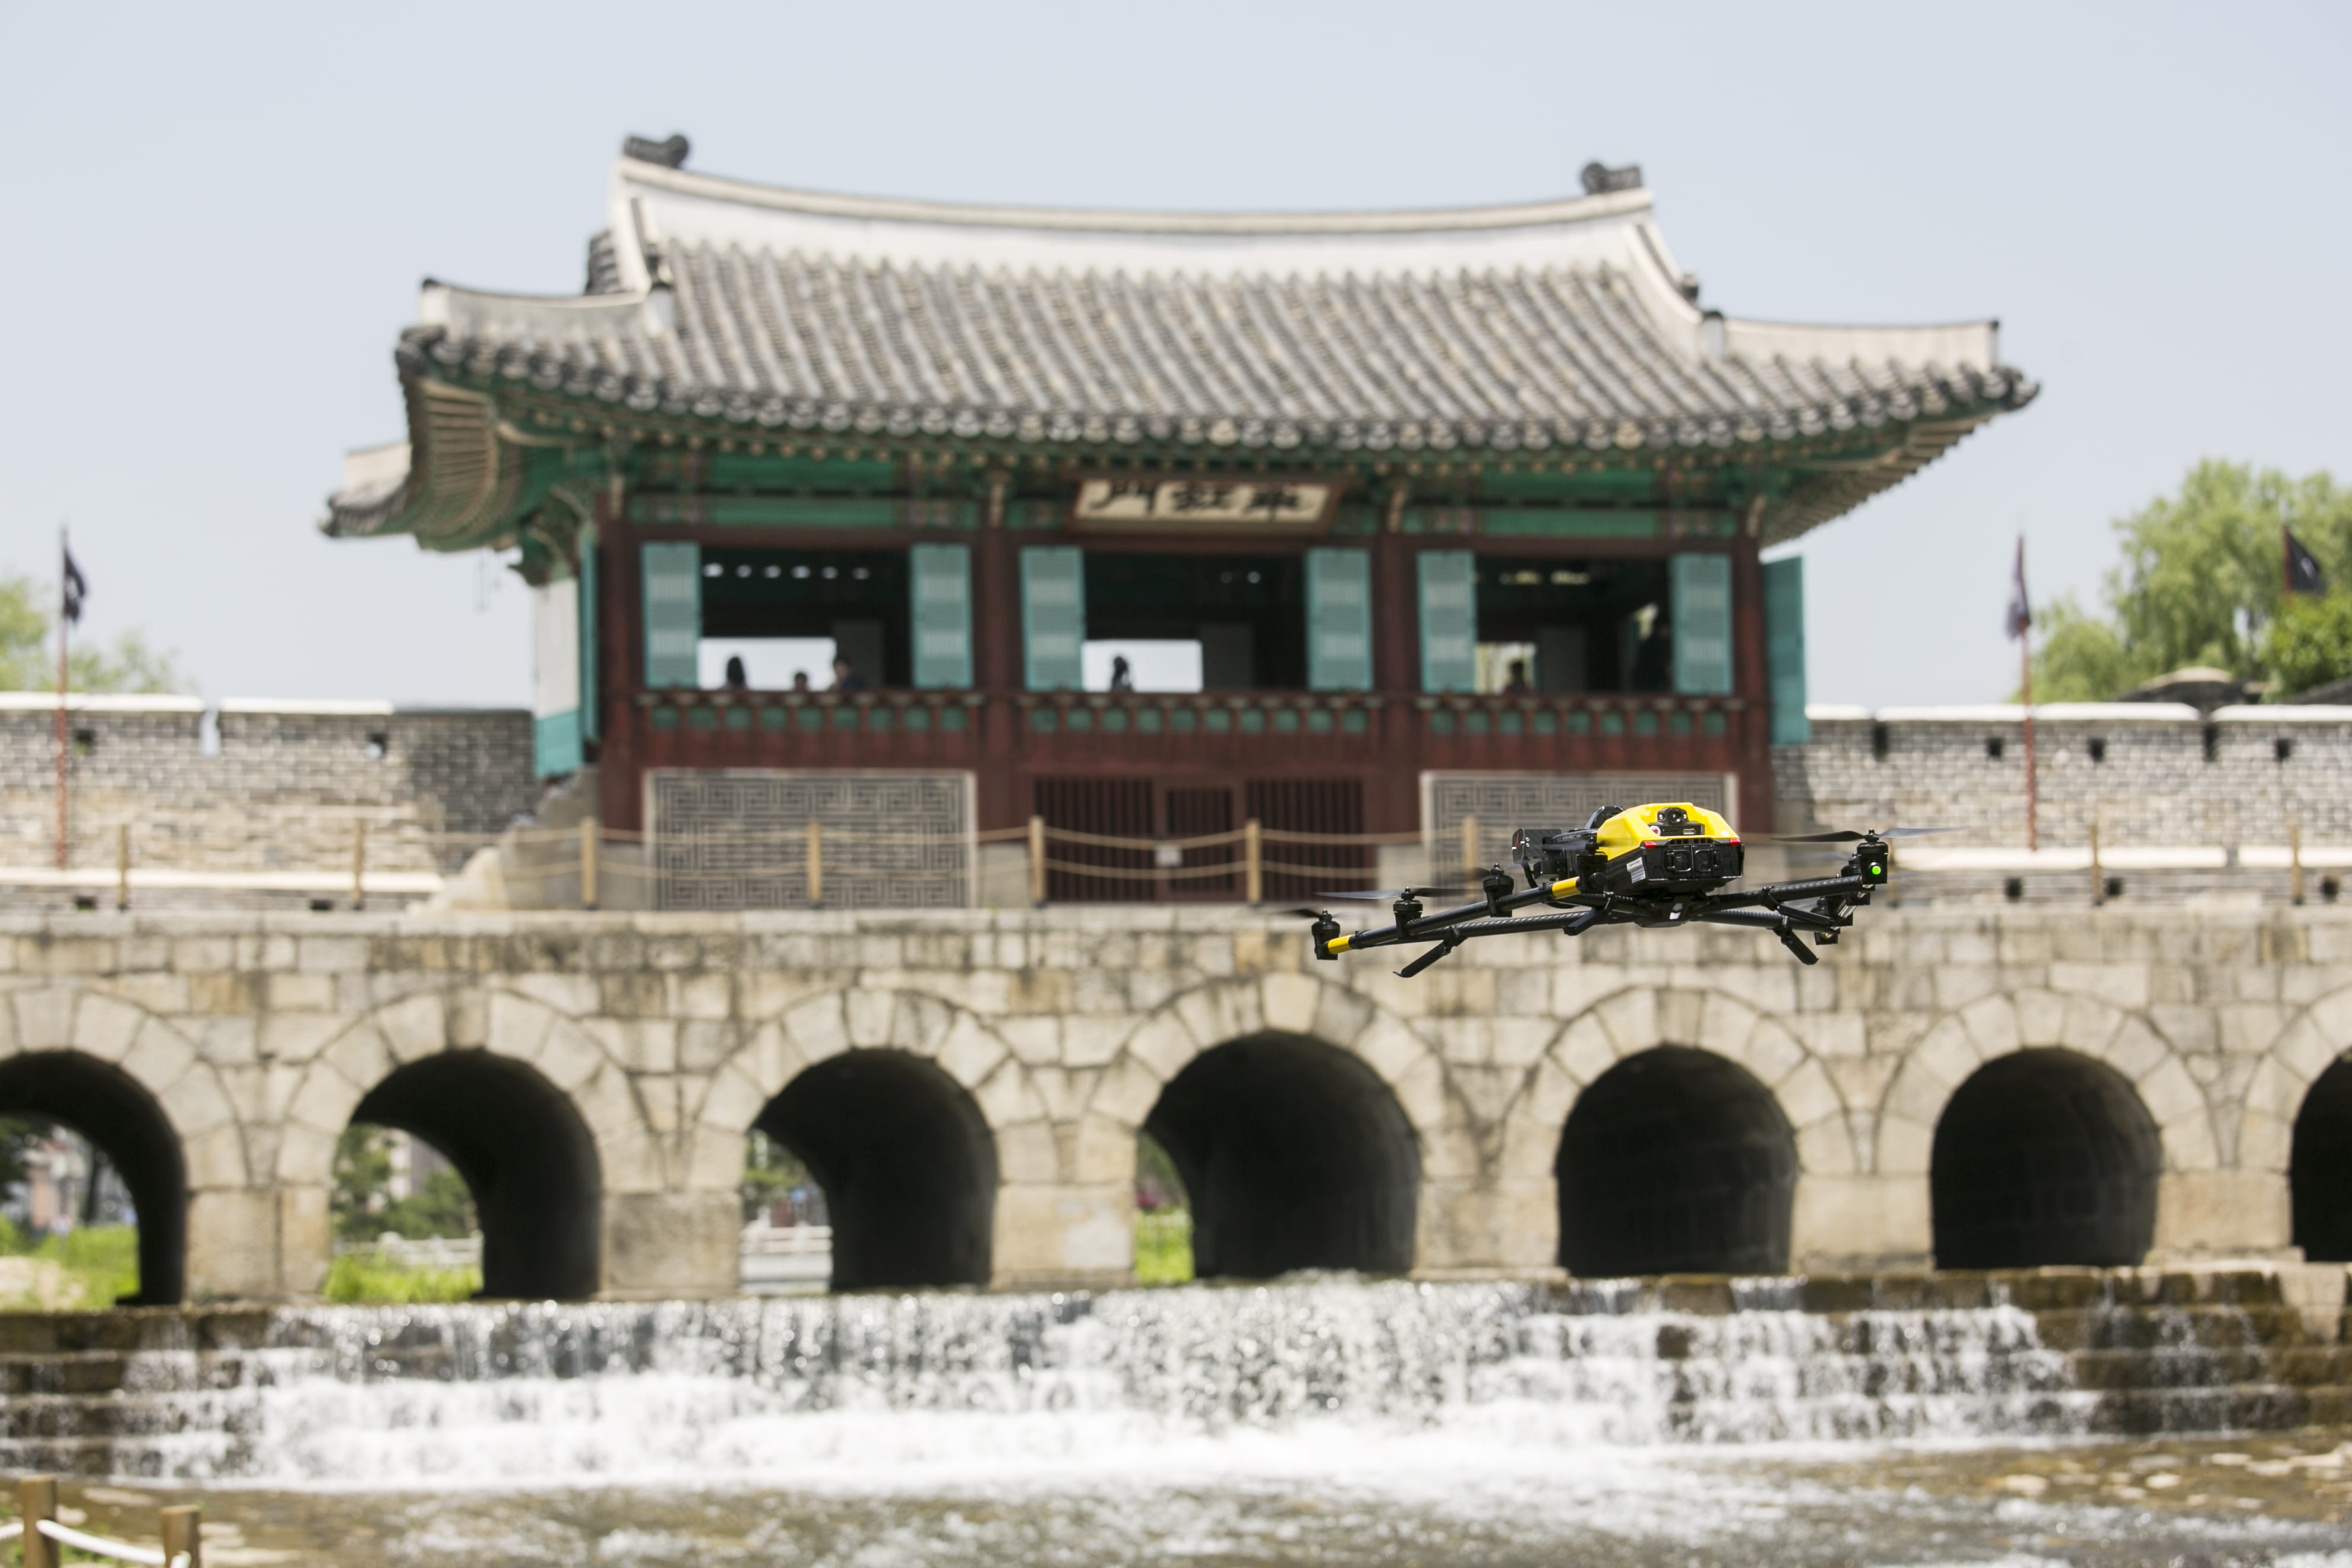 Using the Intel Falcon 8+ system and 36-megapixel Sony A7R payload, Intel’s strategic partner DRONEID was able to conduct an aerial survey and inspect the Hwahongmun Gate in just a few hours. (Credit: DRONEID)